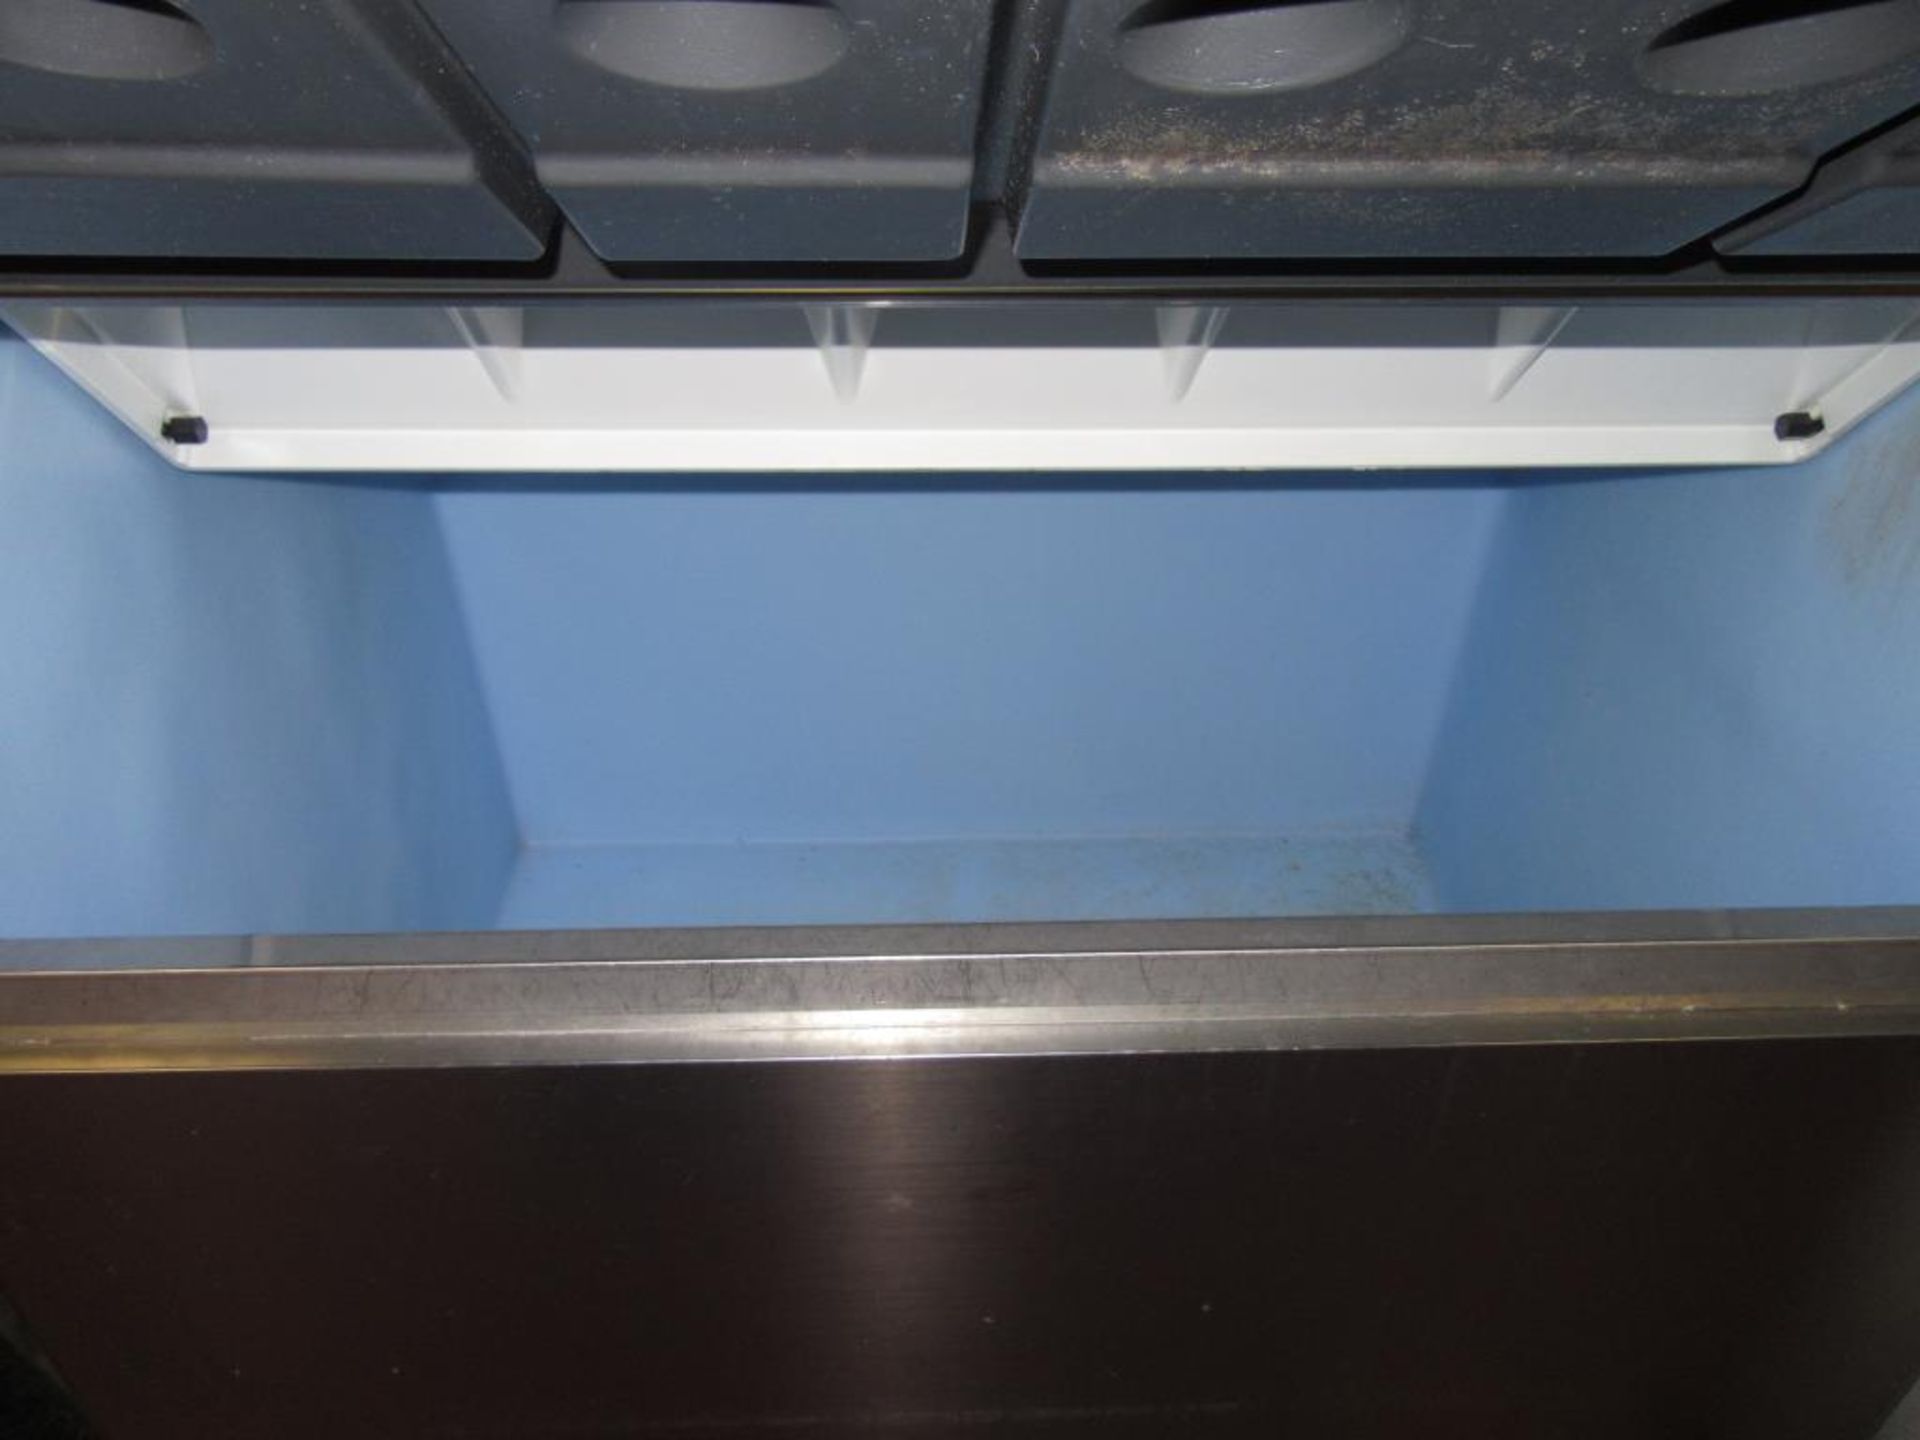 Ice Maker - Image 2 of 2